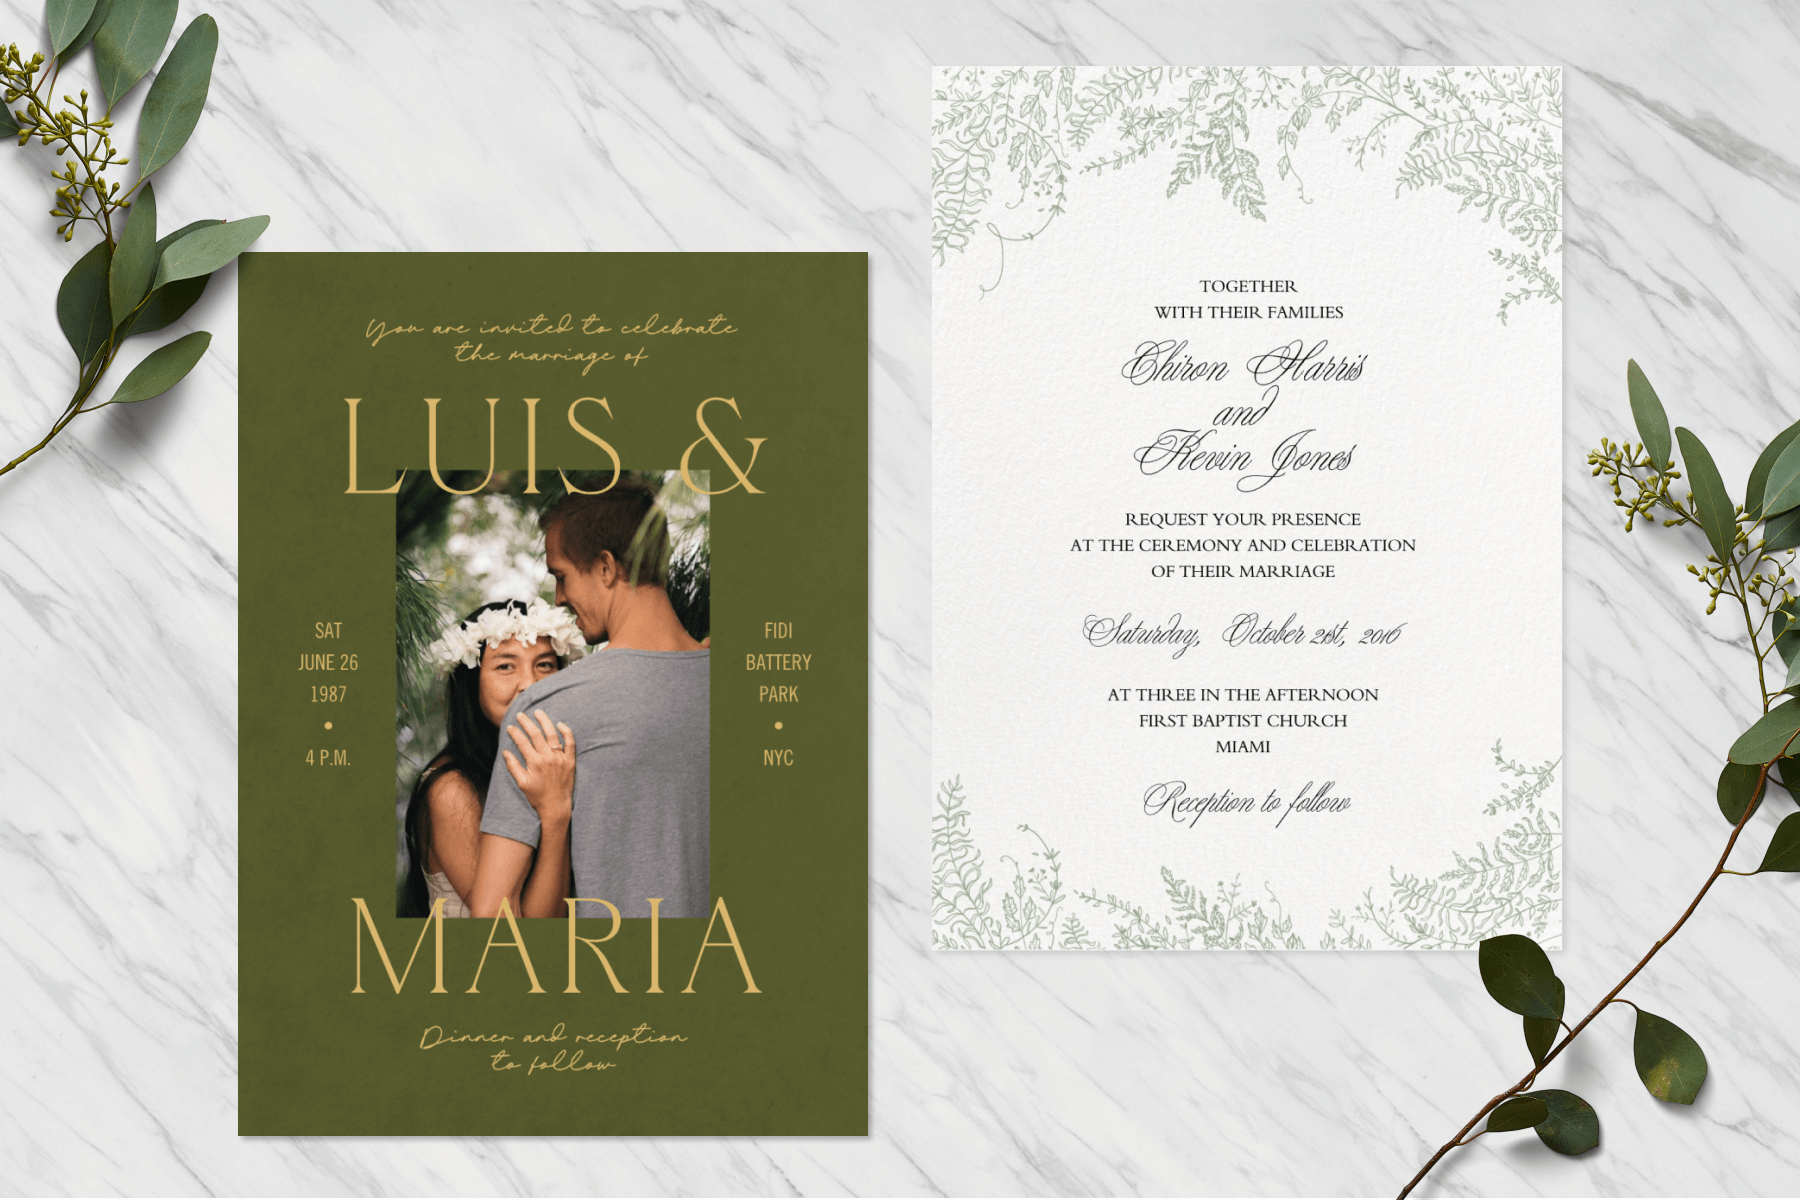 Always & Forever White Save the Date Card